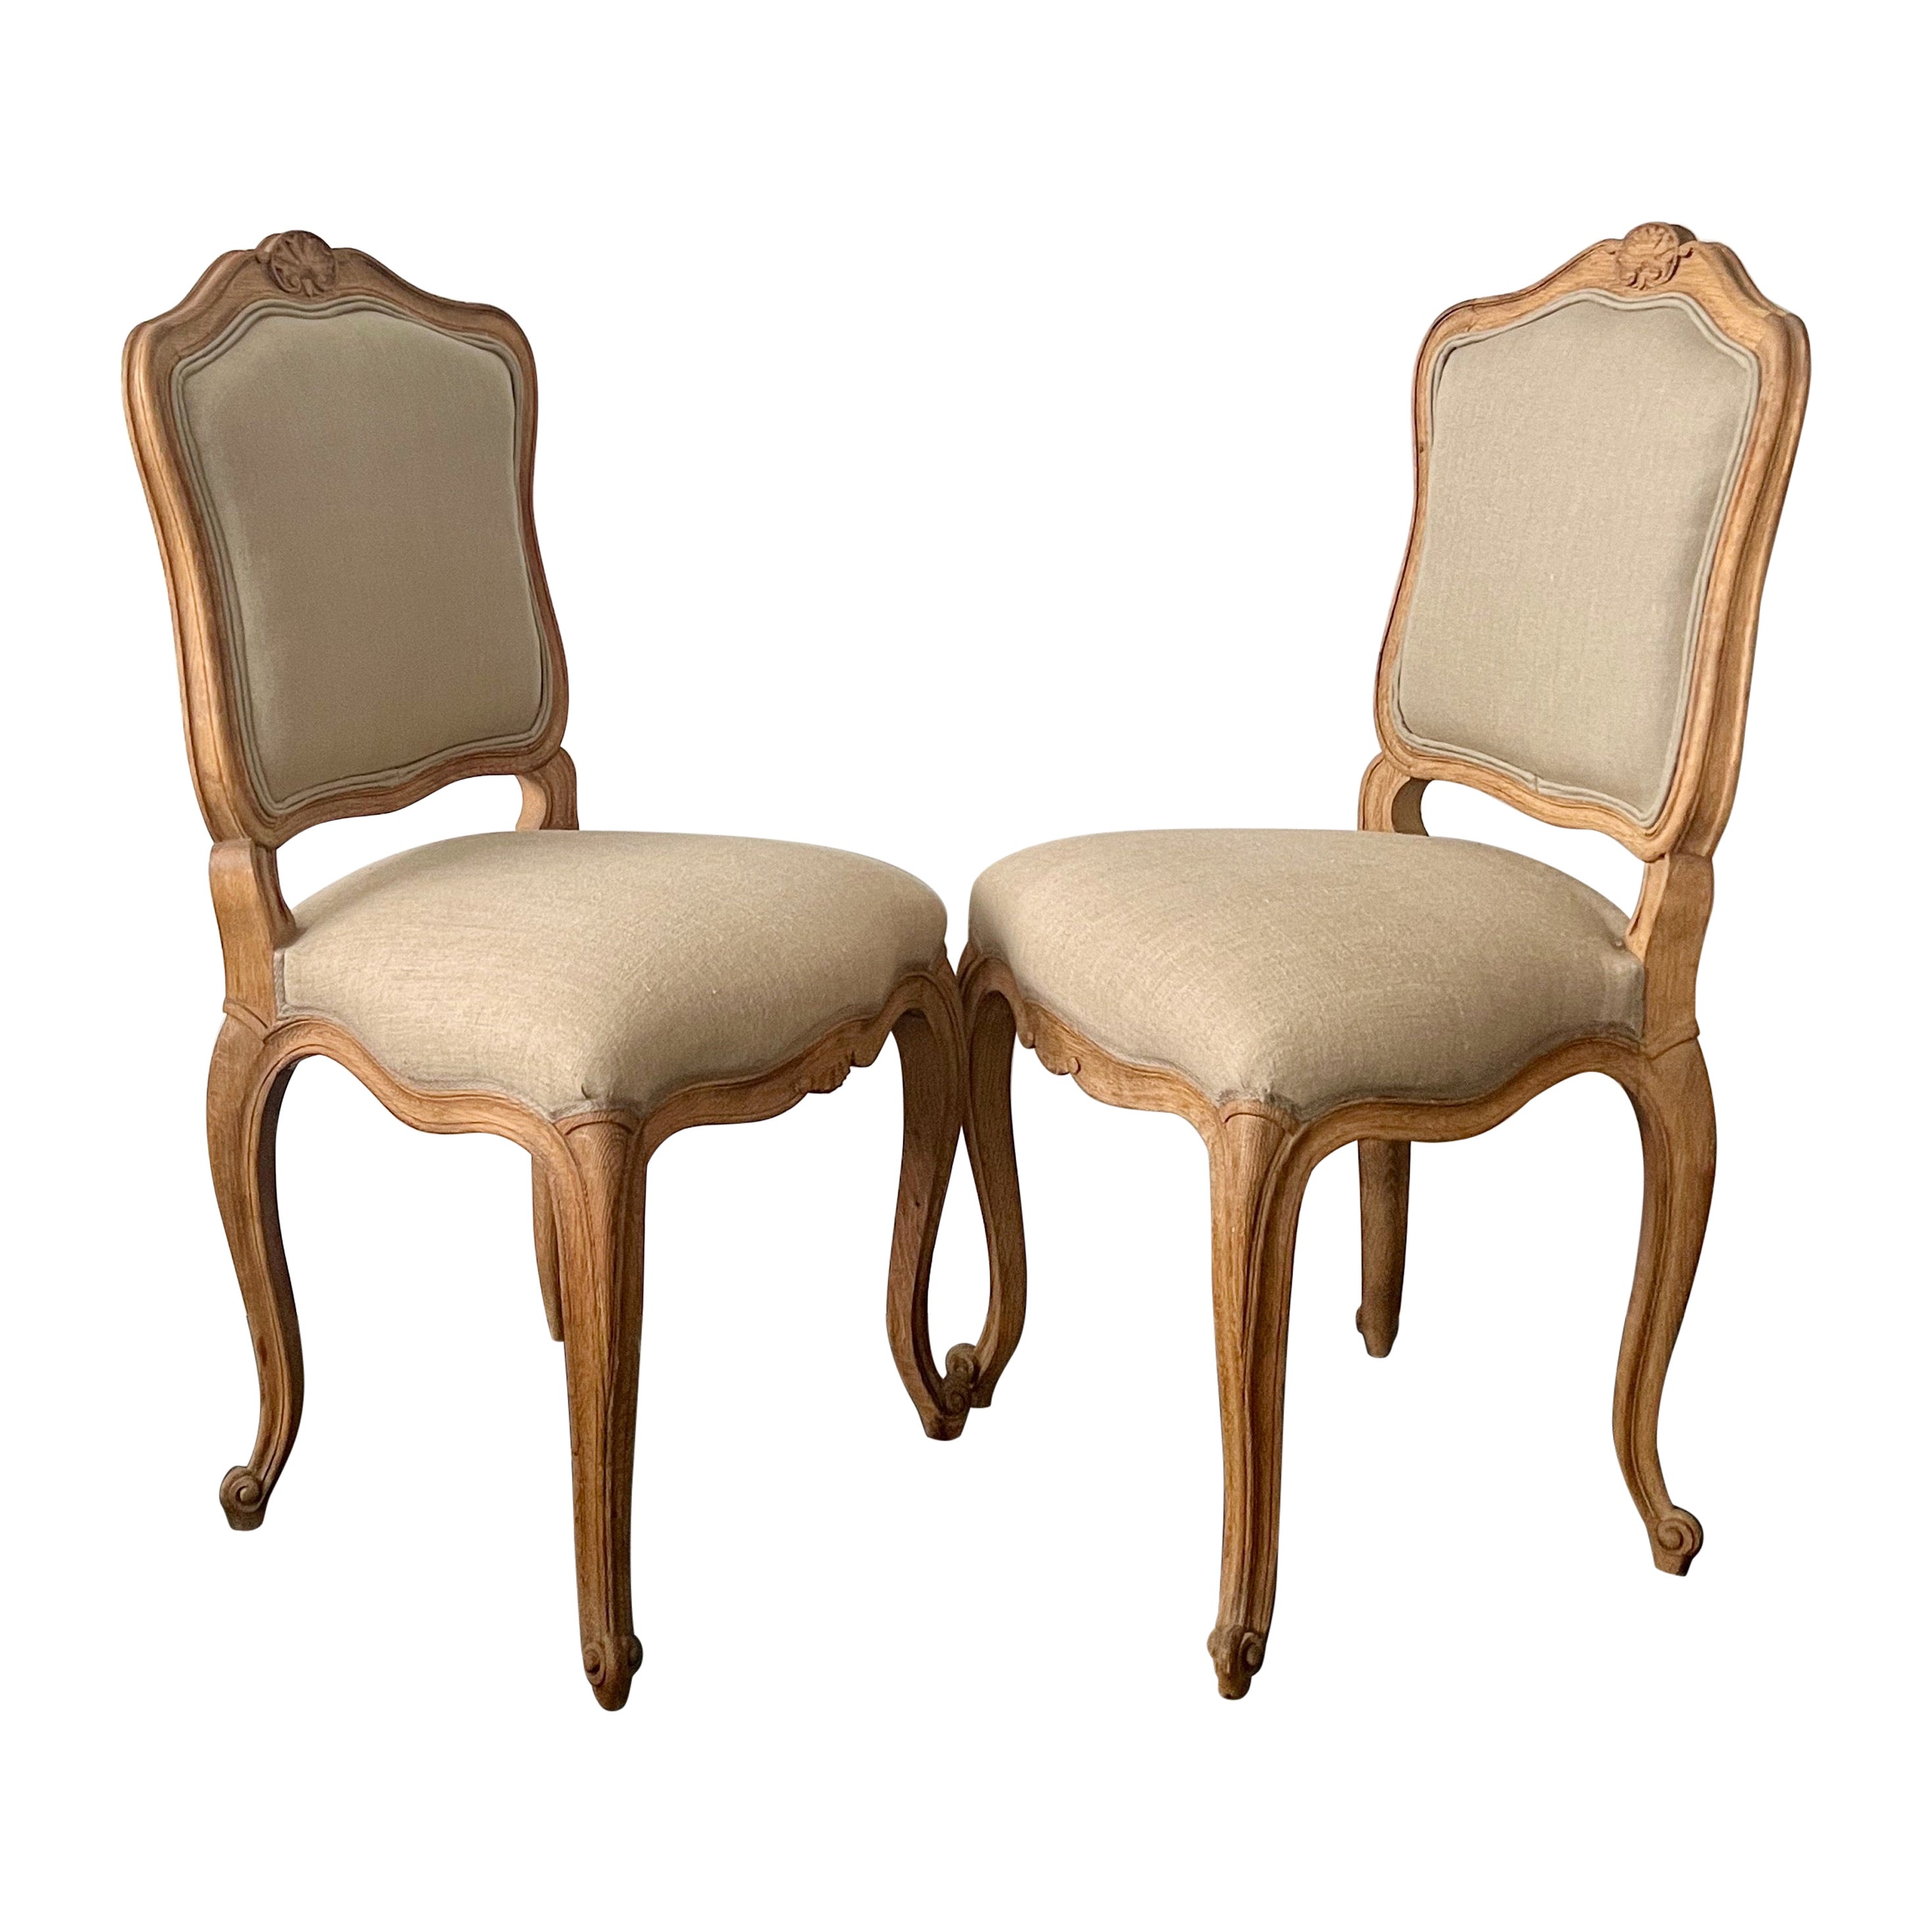 Pair of 19th century French LXV Style Chairs For Sale